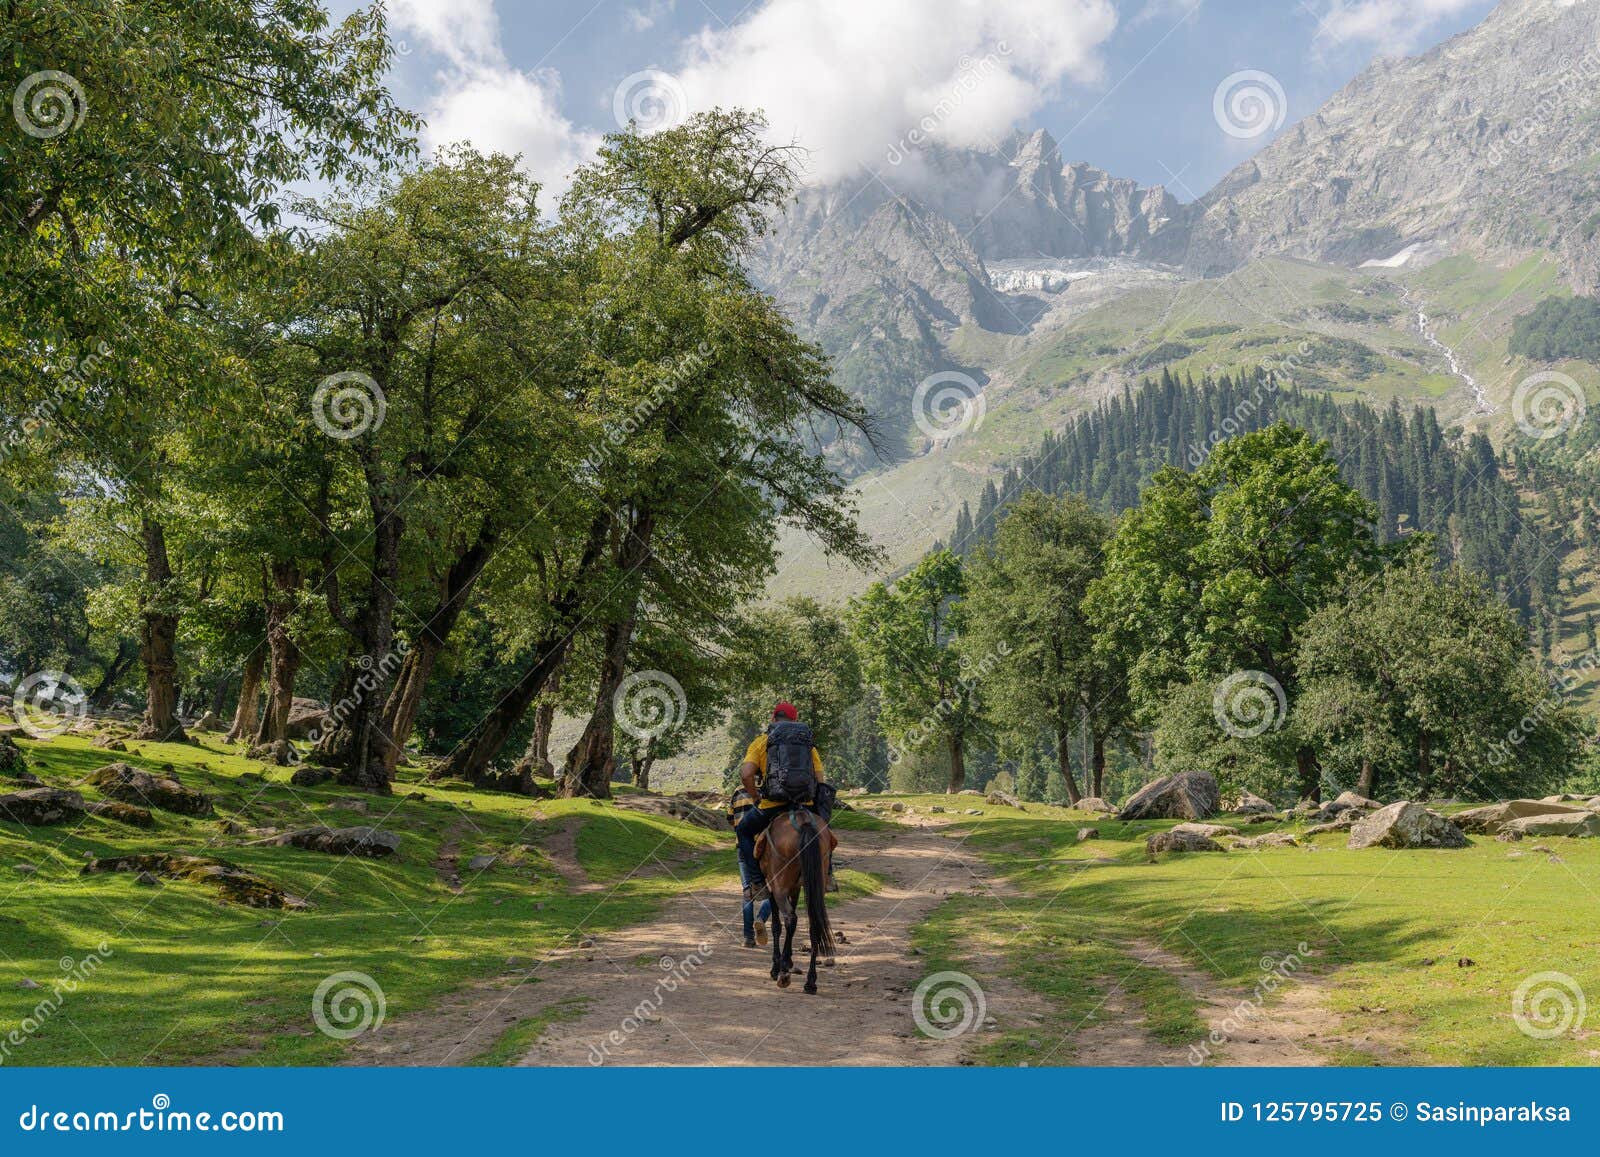 travelling in summer, backpacker riding horse in summer at sonamarg, jammu and kashmir india